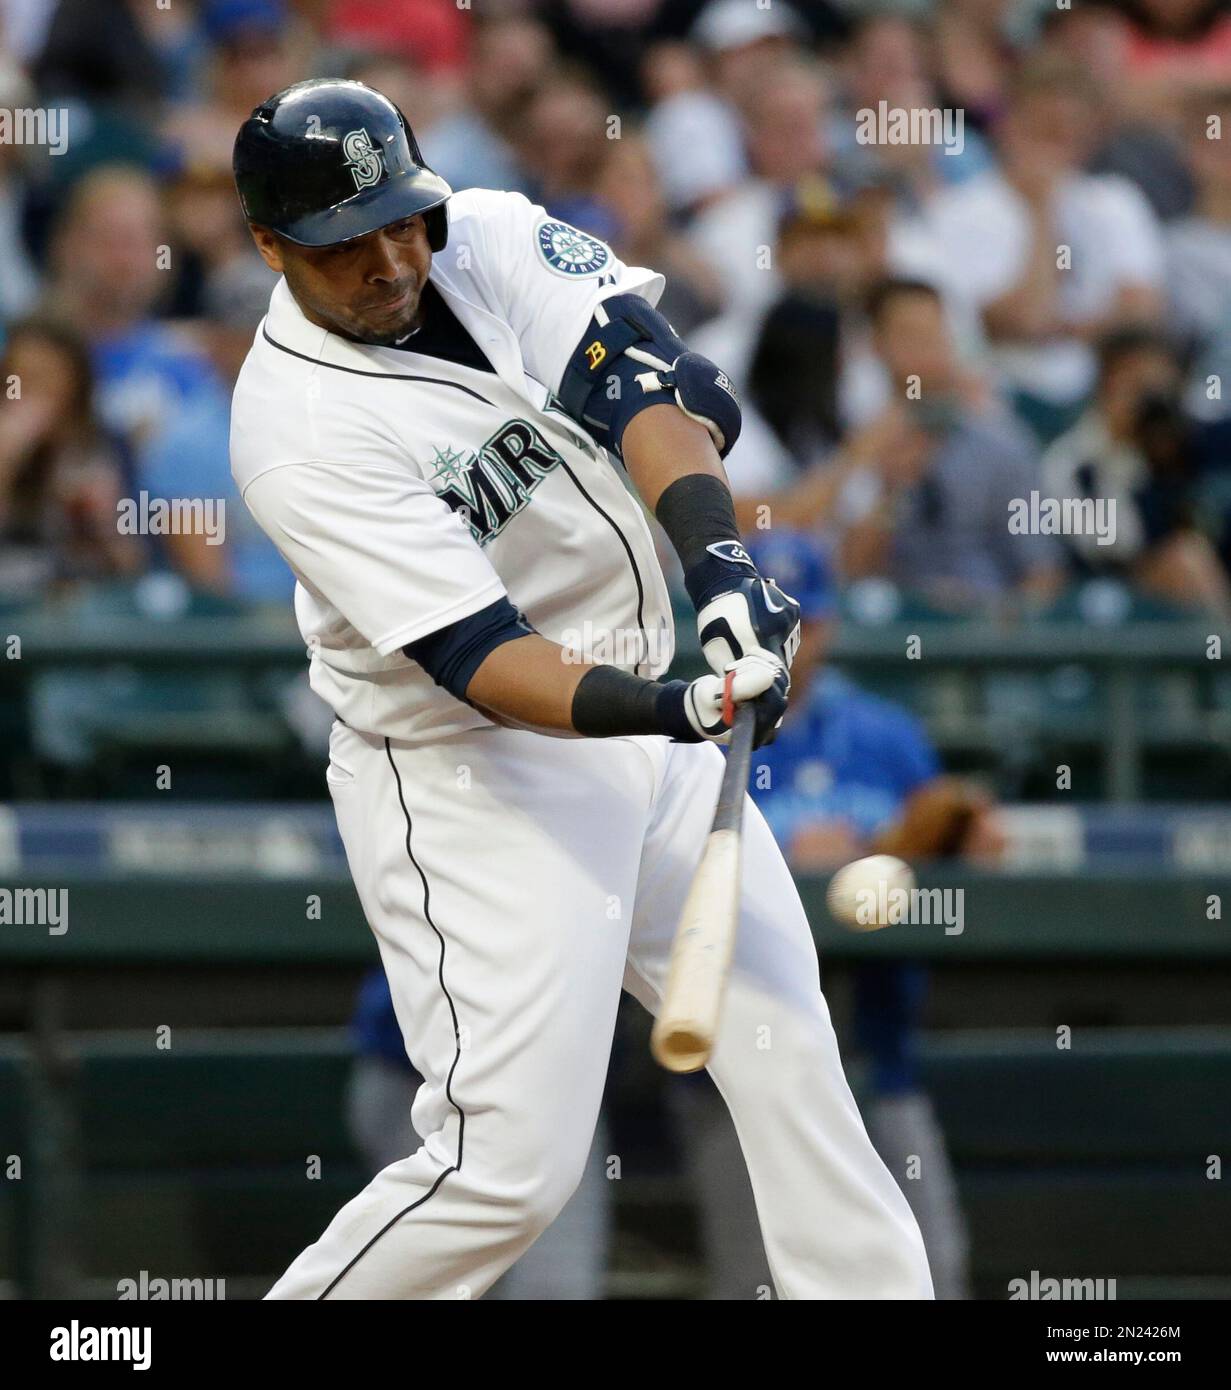 Seattle Mariners' Nelson Cruz in action against the Kansas City